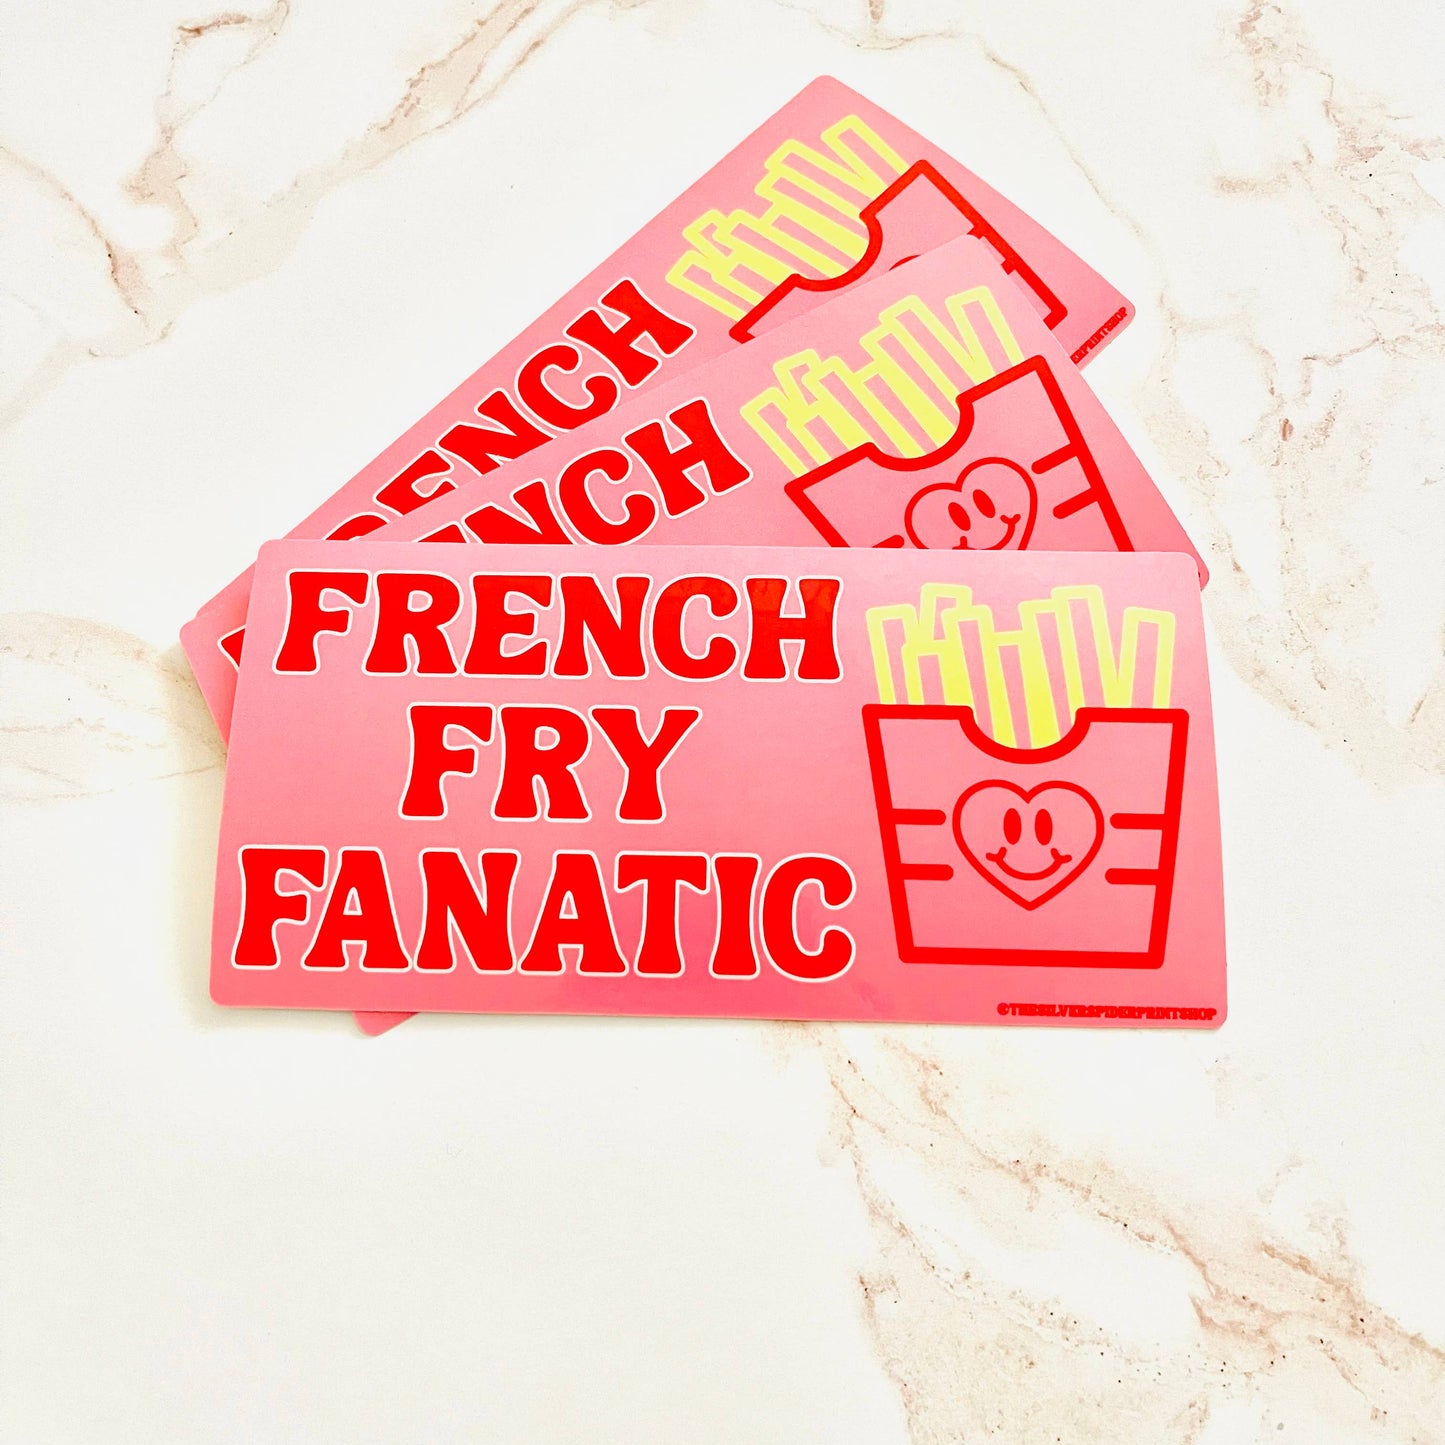 French Fry Fanatic pink junk food funny Bumper Sticker